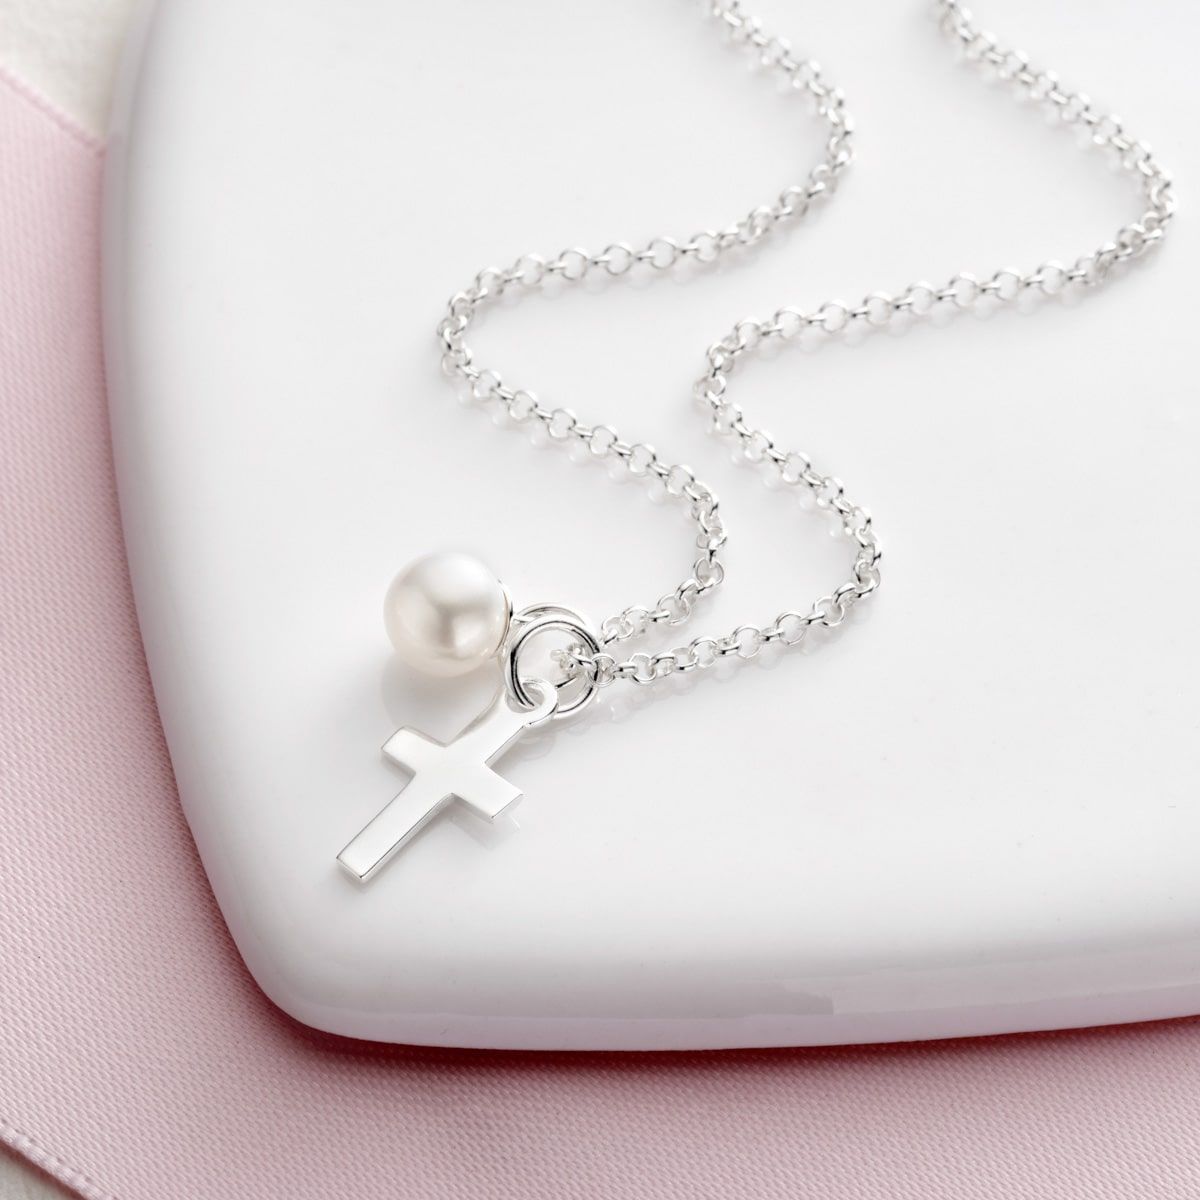 Baby's Christening Cross Necklace